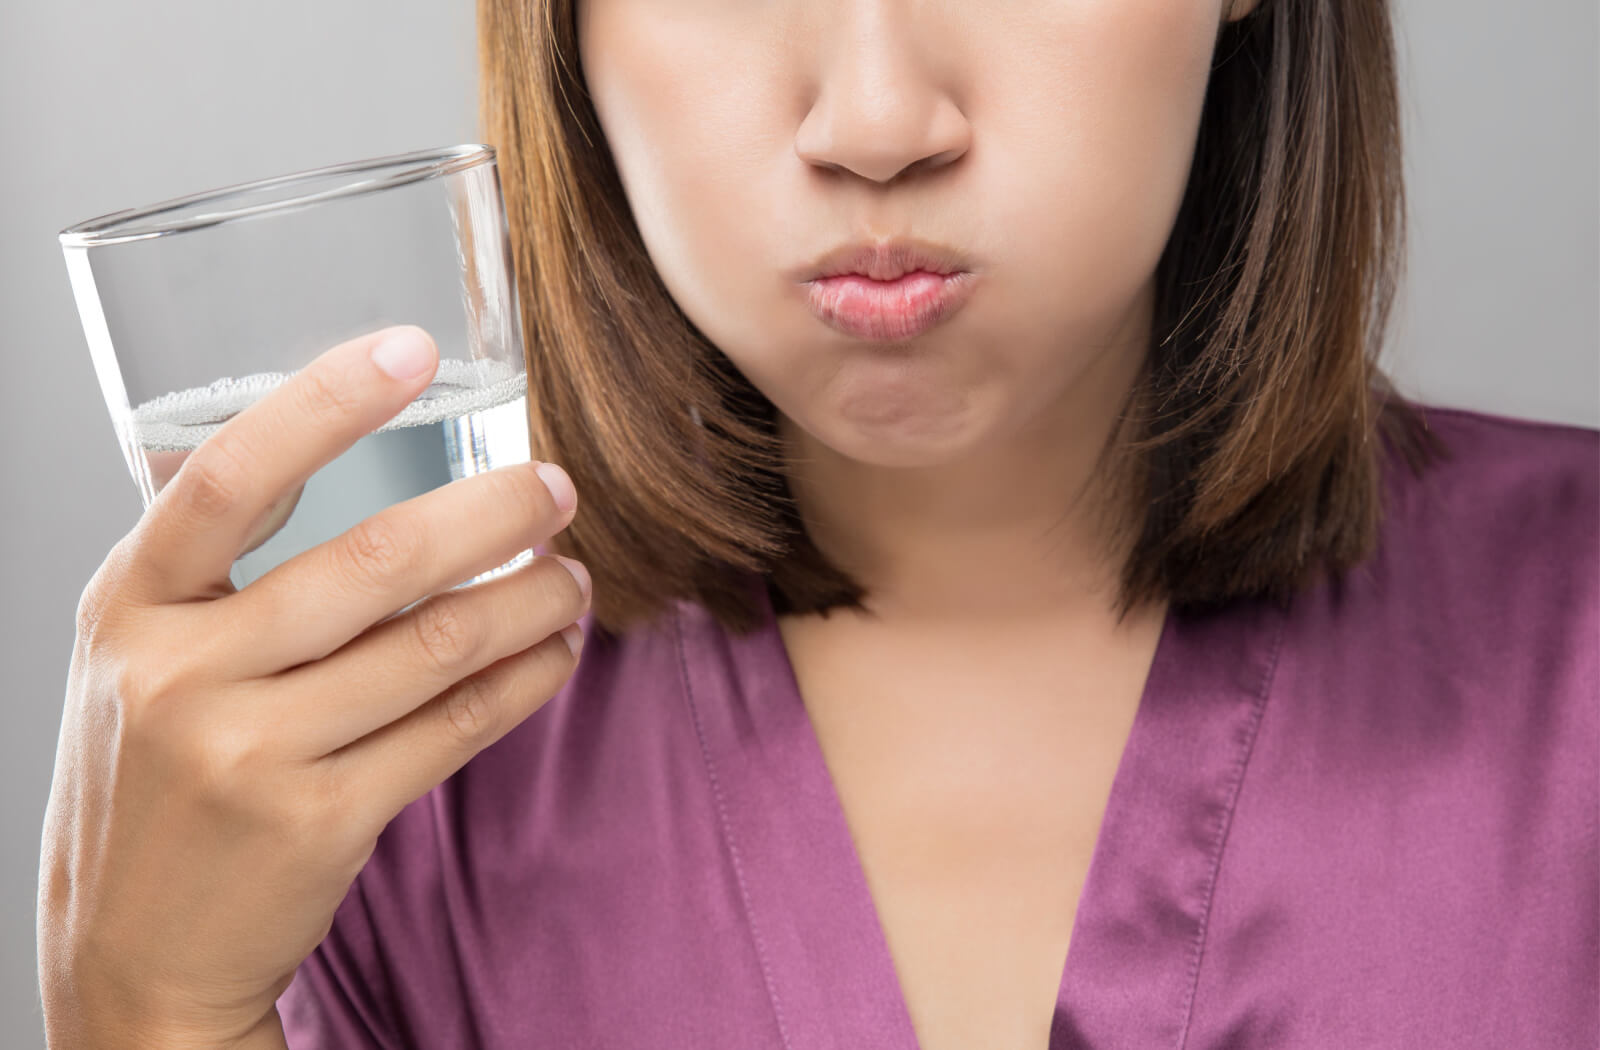 A close-up of a woman holding a glass of saltwater intended for gargling following a tooth extraction.
